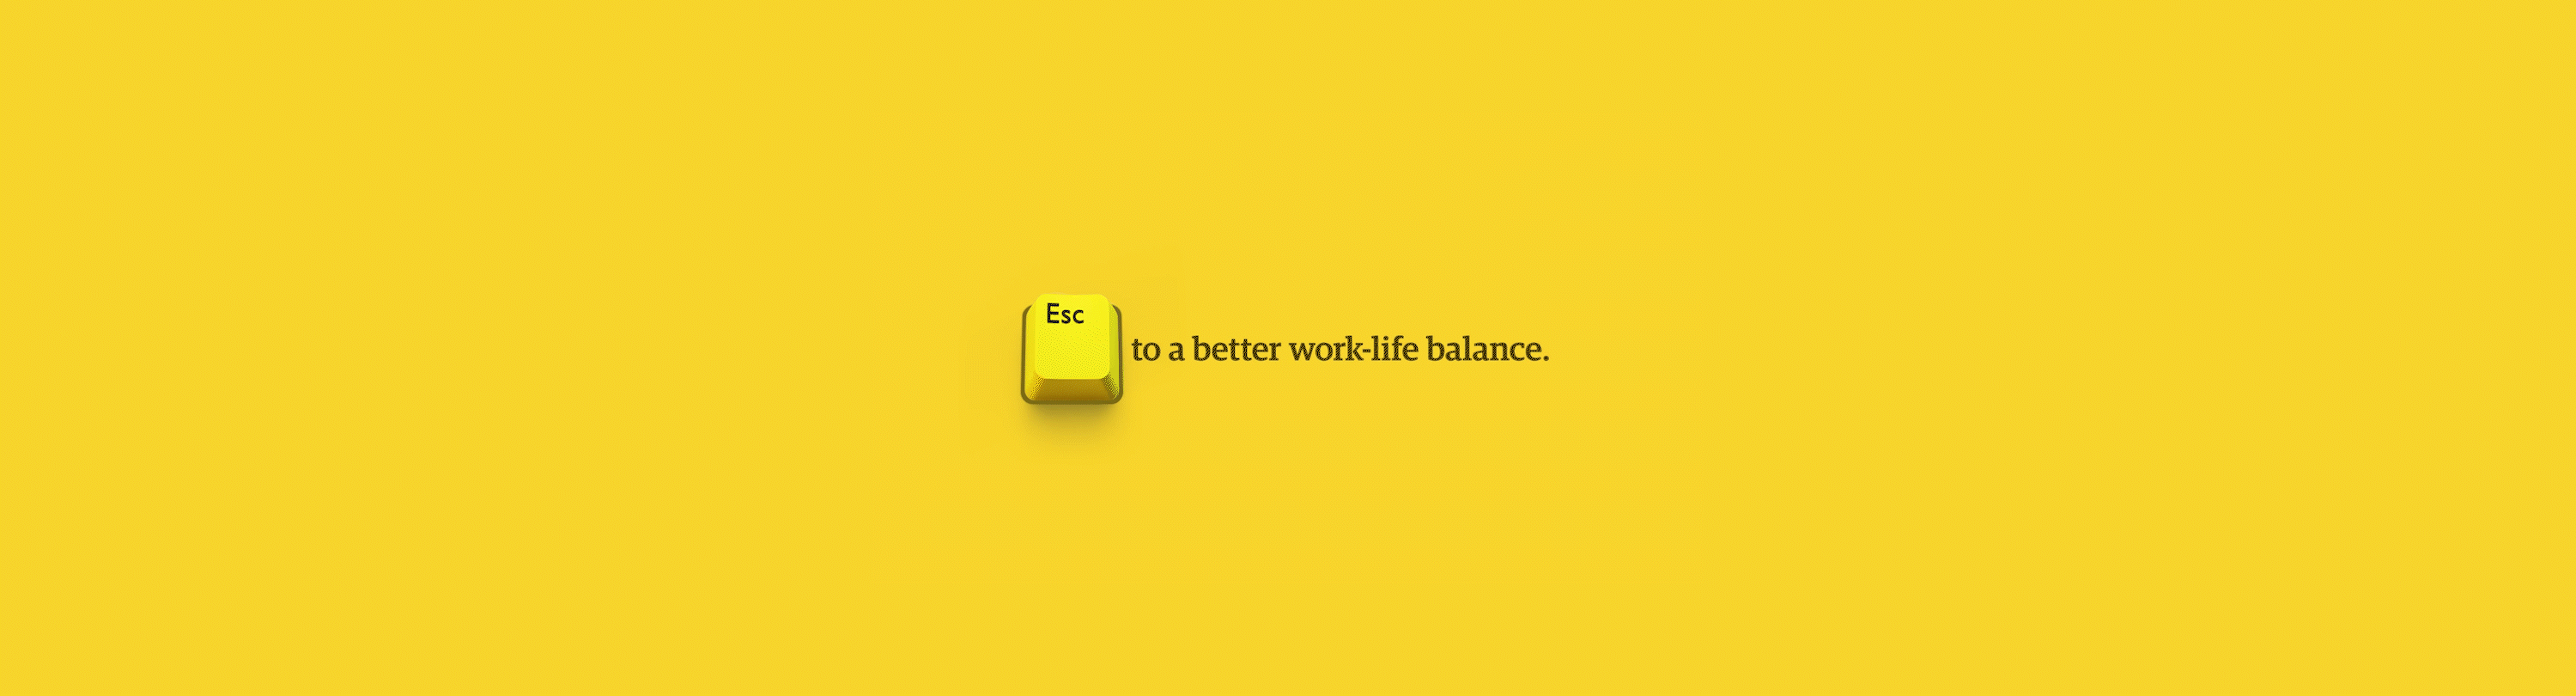 Keyboard ESC key on yellow background with "to a better work-life balance" written next to it.